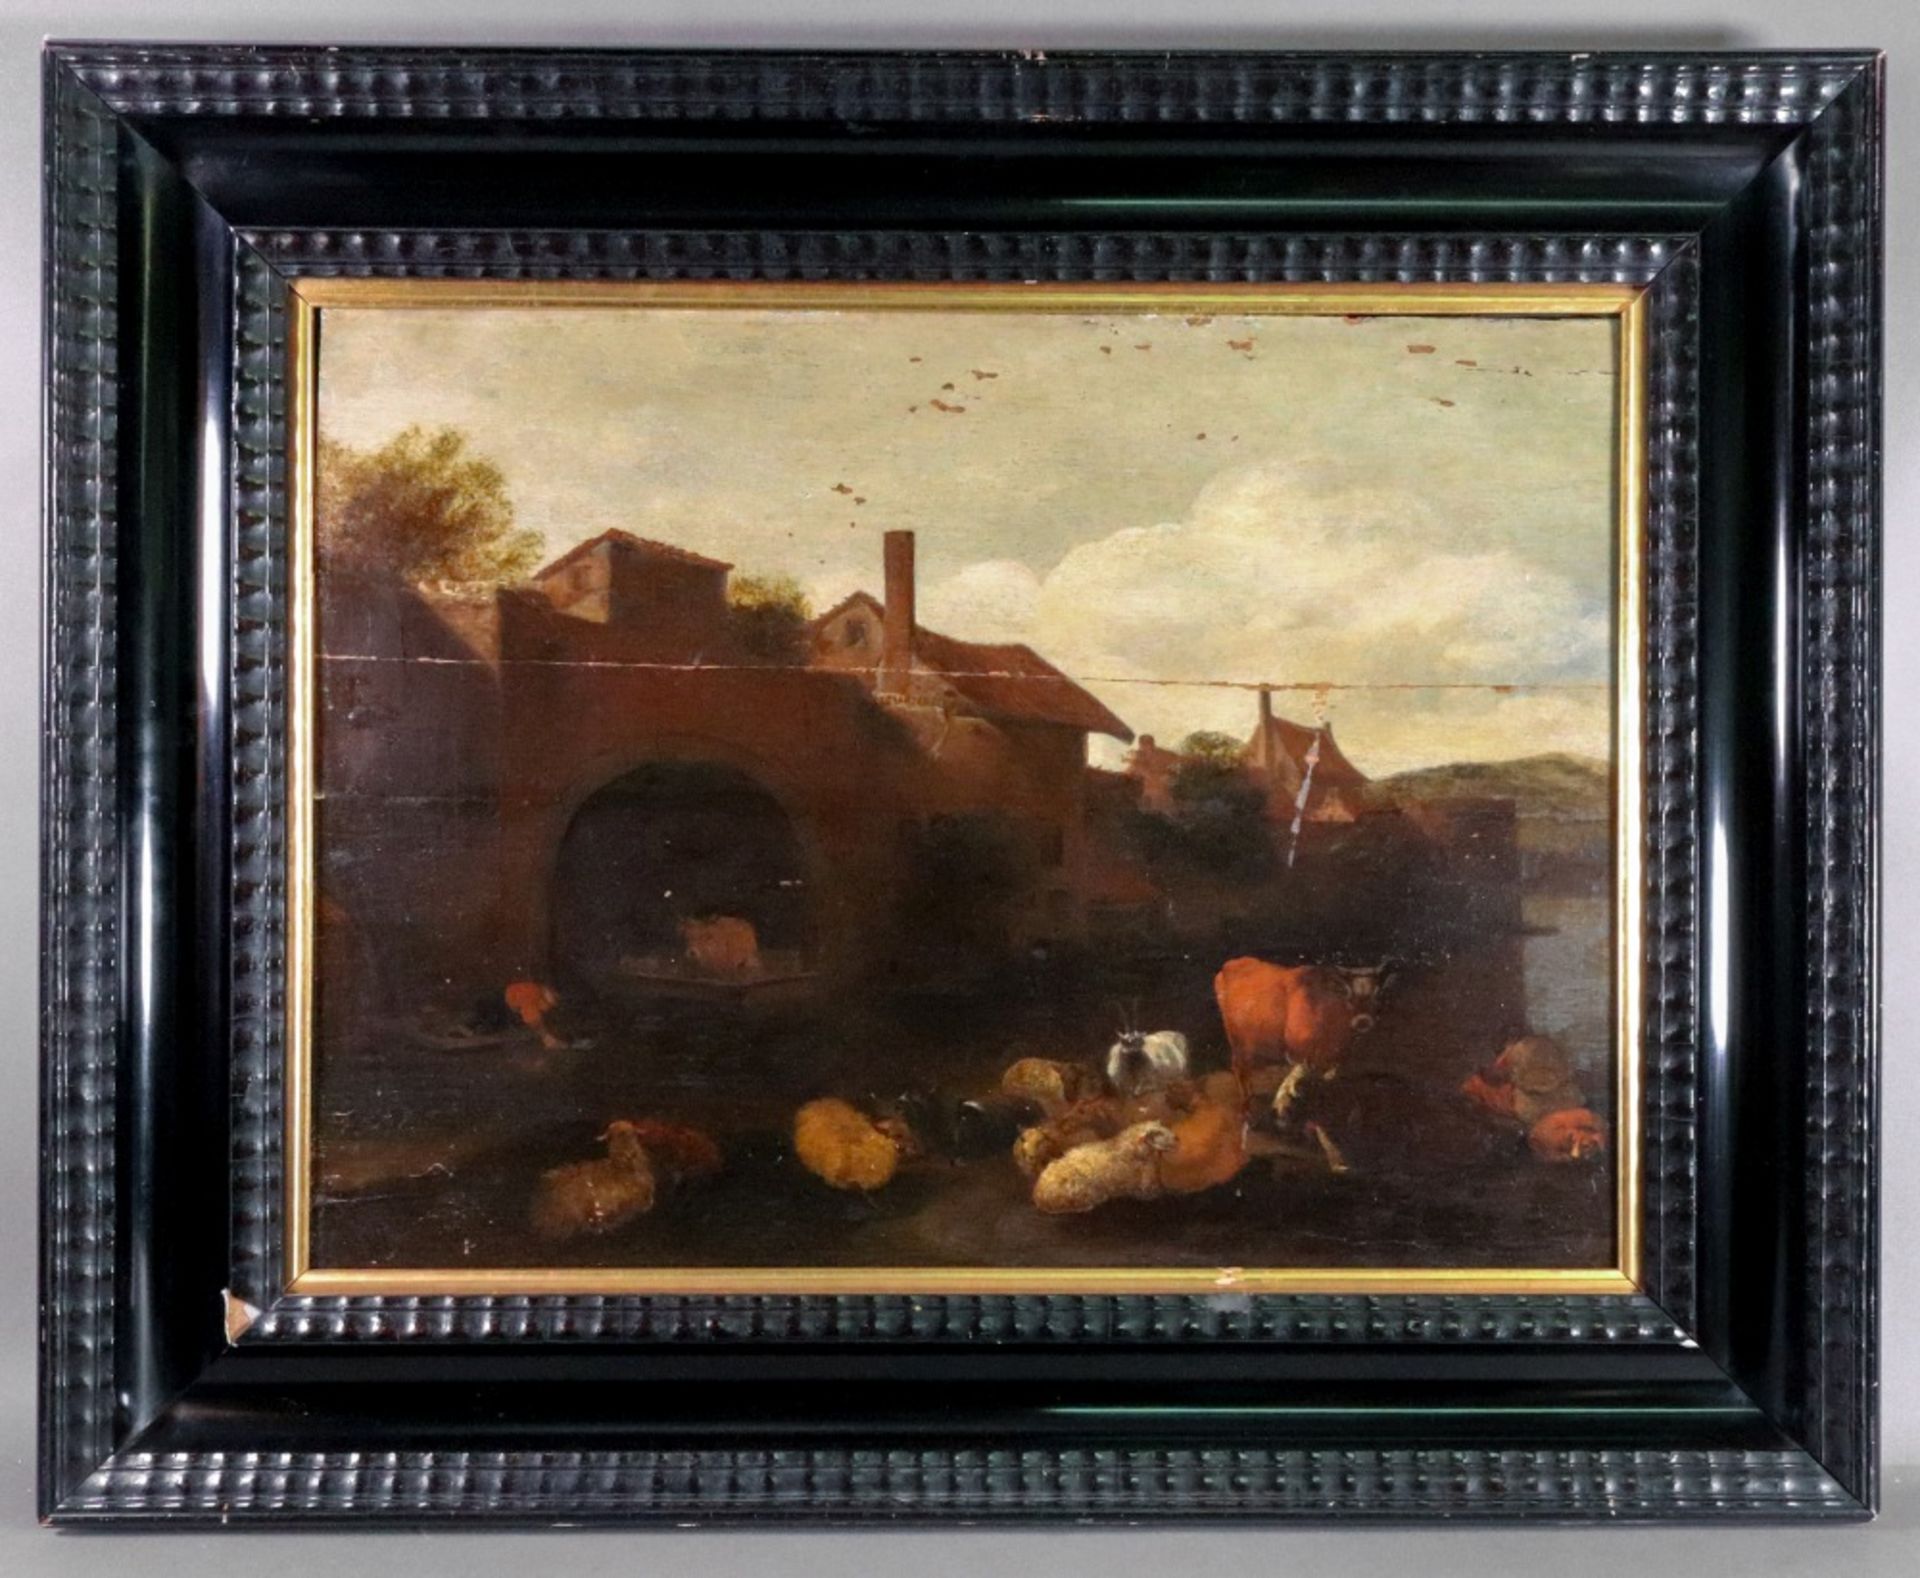 European School, 18th century, Sheep and cattle by a river and buildings, oil on panel, 49 x 66cm. - Bild 2 aus 2